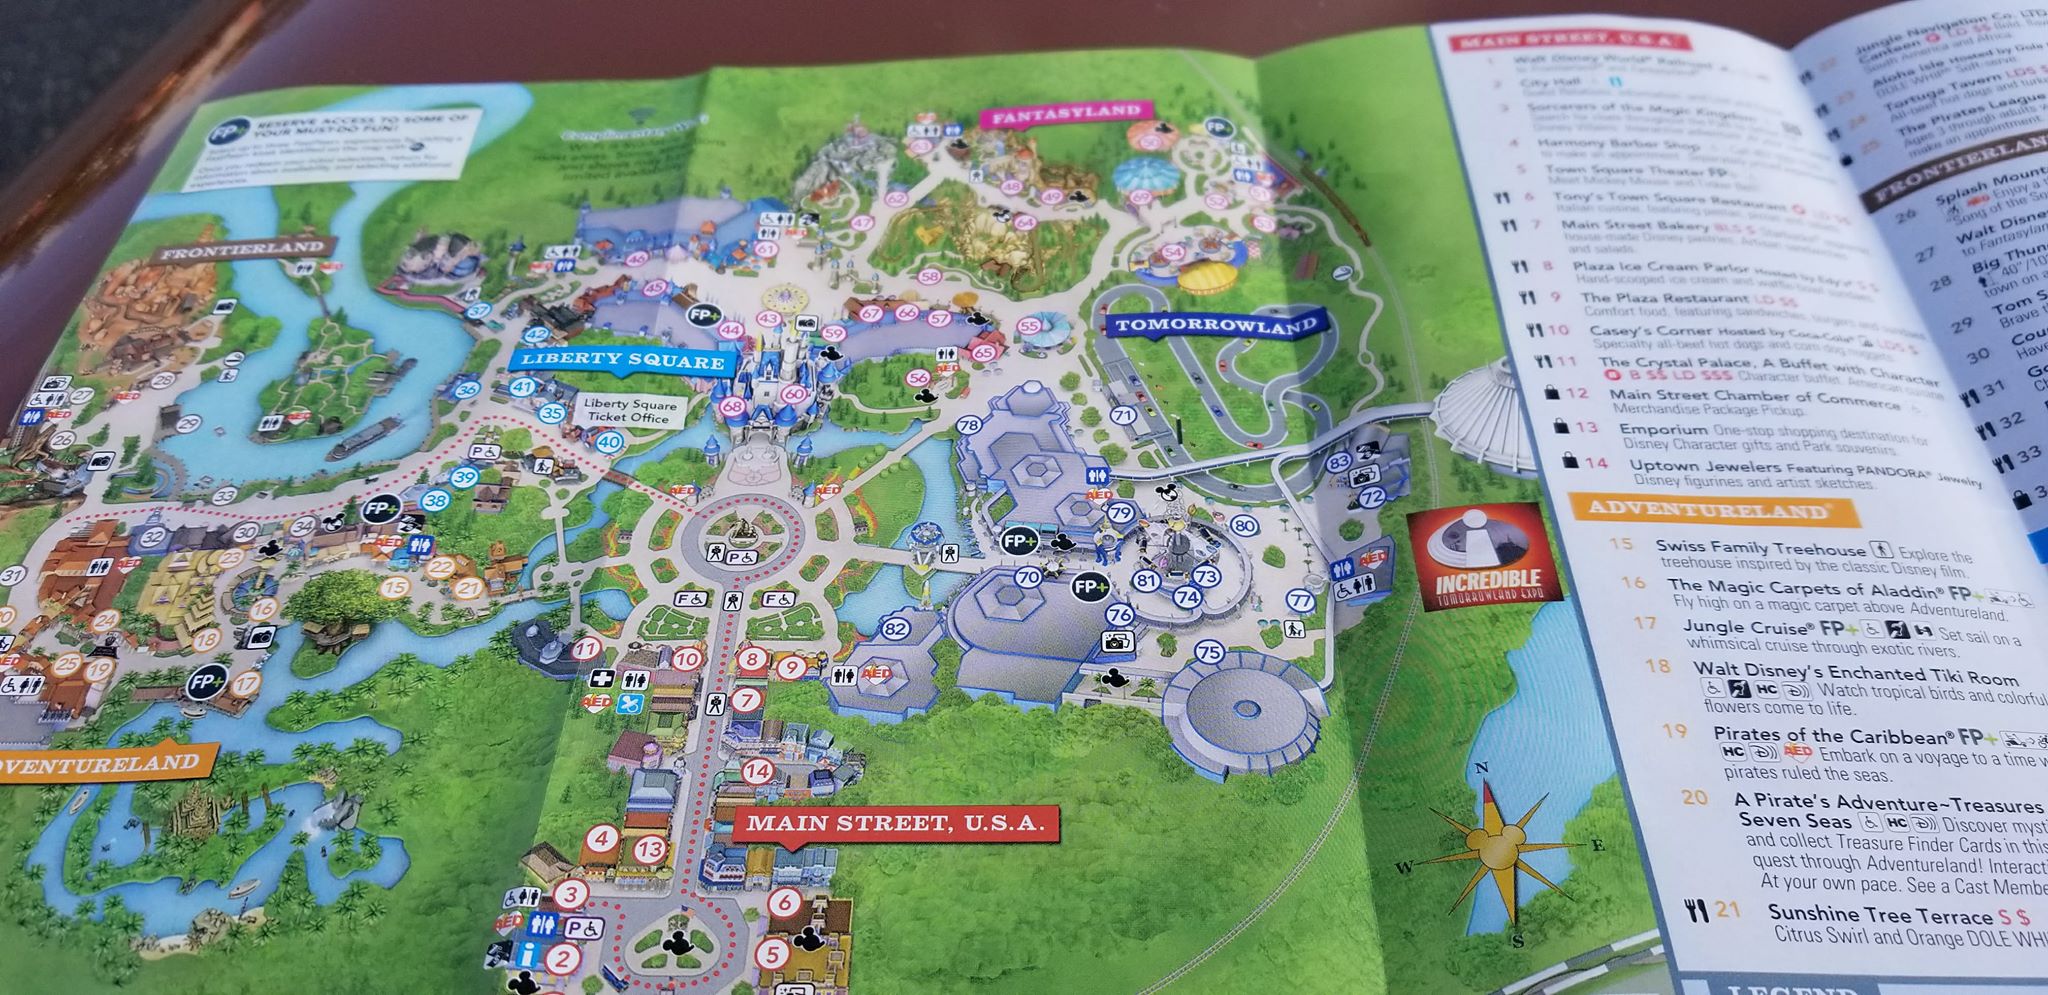 Incredible Tomorrowland Expo Guide Maps Now Available